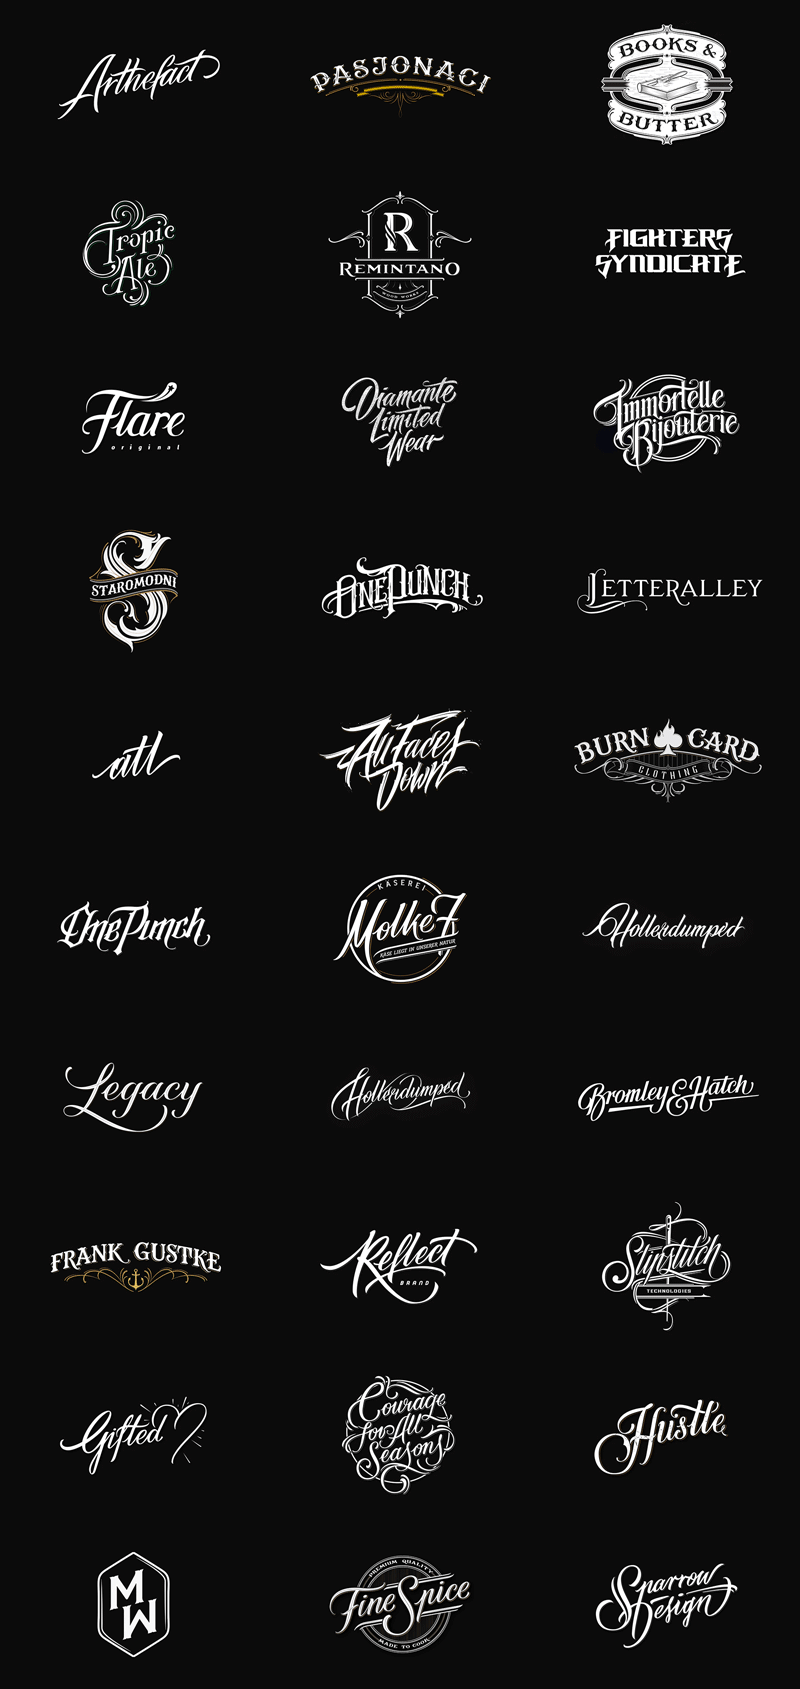 30 completely hand lettered logotypes by Mateusz Witczak, a Warsaw, Poland based freelance graphic designer.